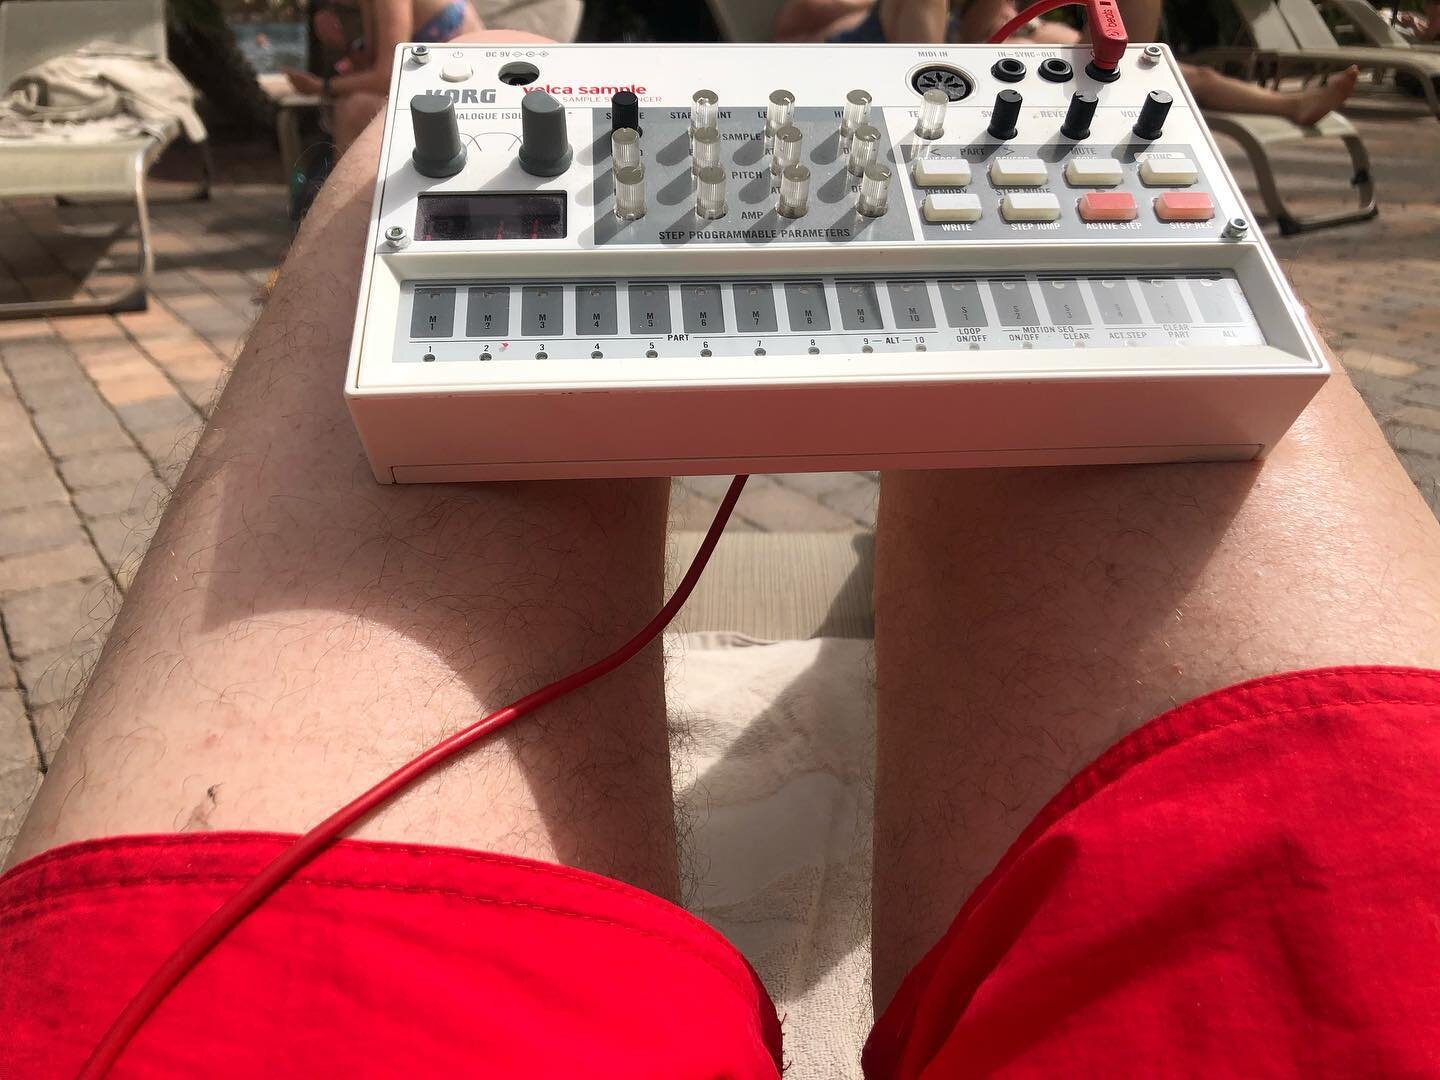 Working on some Strange Gravity beats by the pool :)